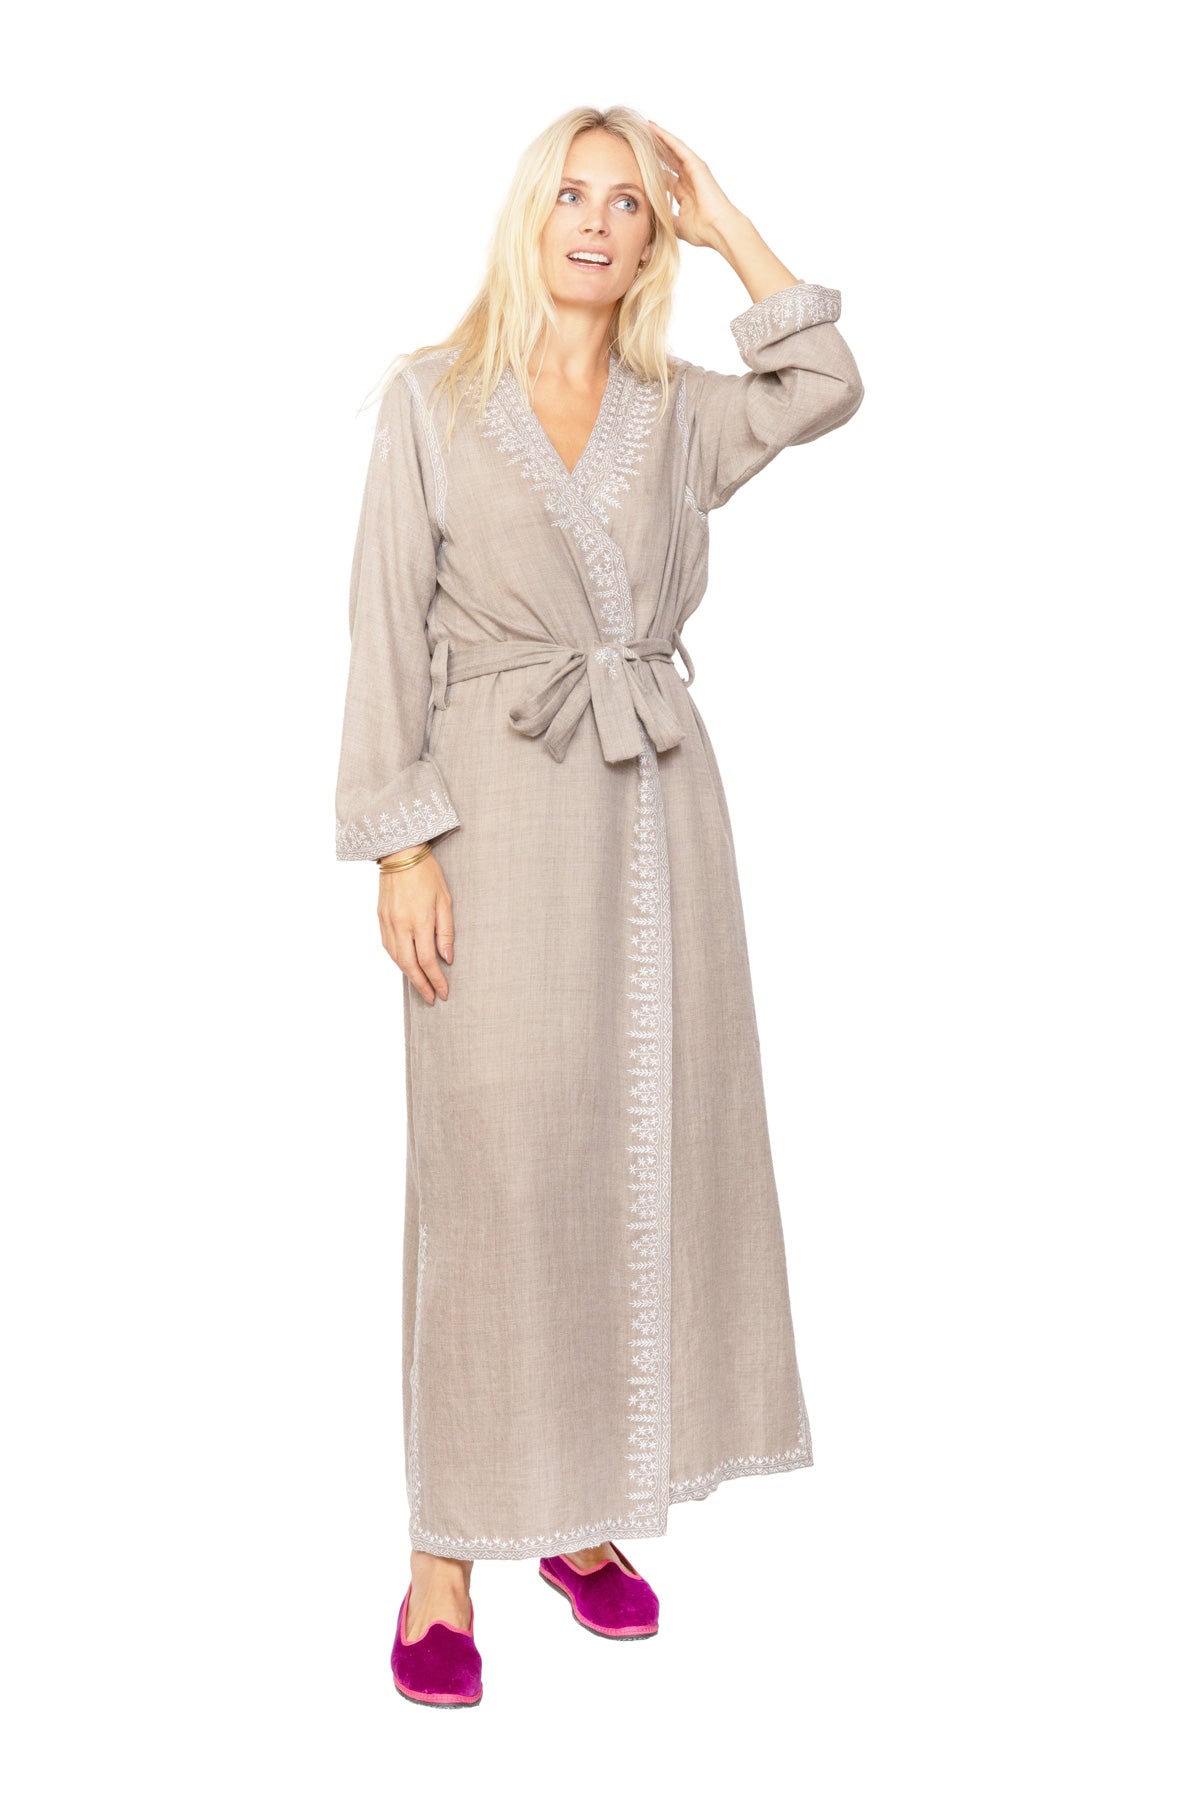 Hand Embroidered Cashmere Dressing Gown